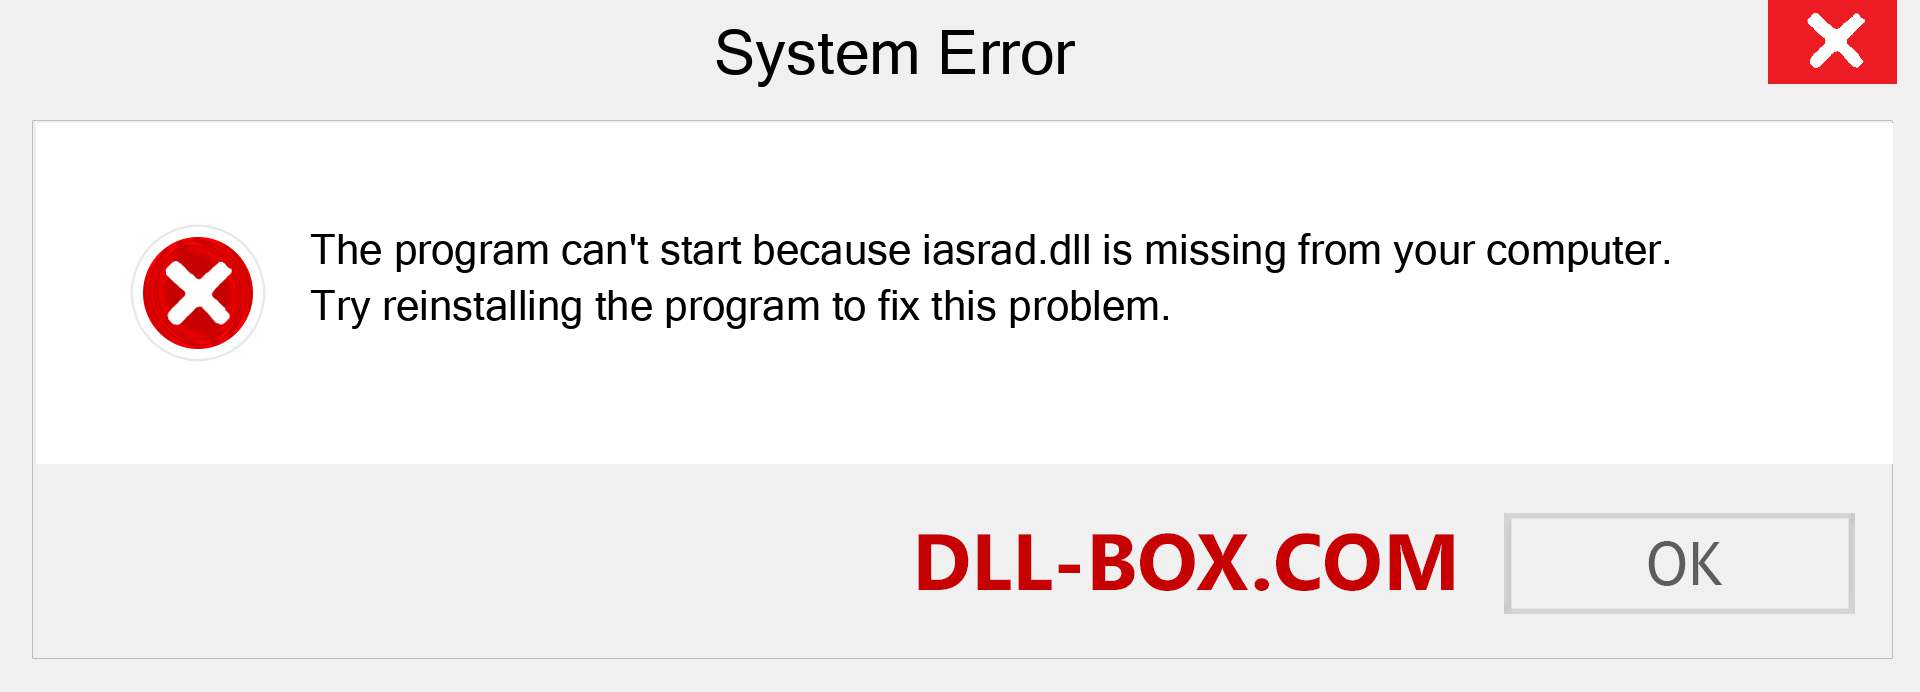  iasrad.dll file is missing?. Download for Windows 7, 8, 10 - Fix  iasrad dll Missing Error on Windows, photos, images